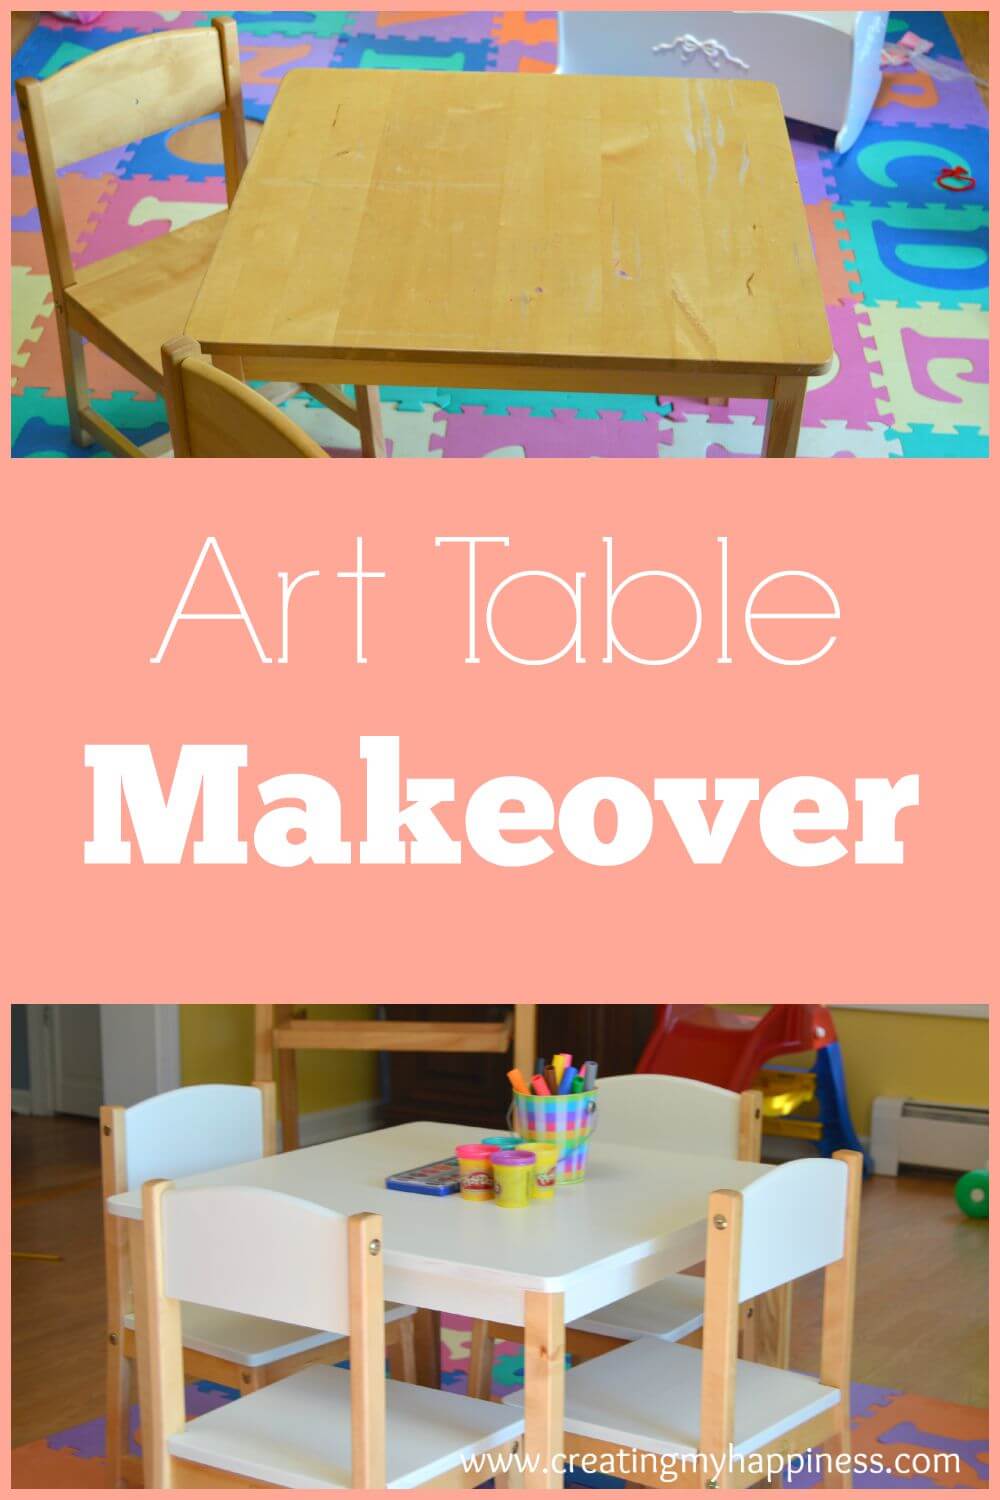 Simple steps for how to turn a tag sale find into a gorgeous piece of furniture. Even your playroom can be fantastic!